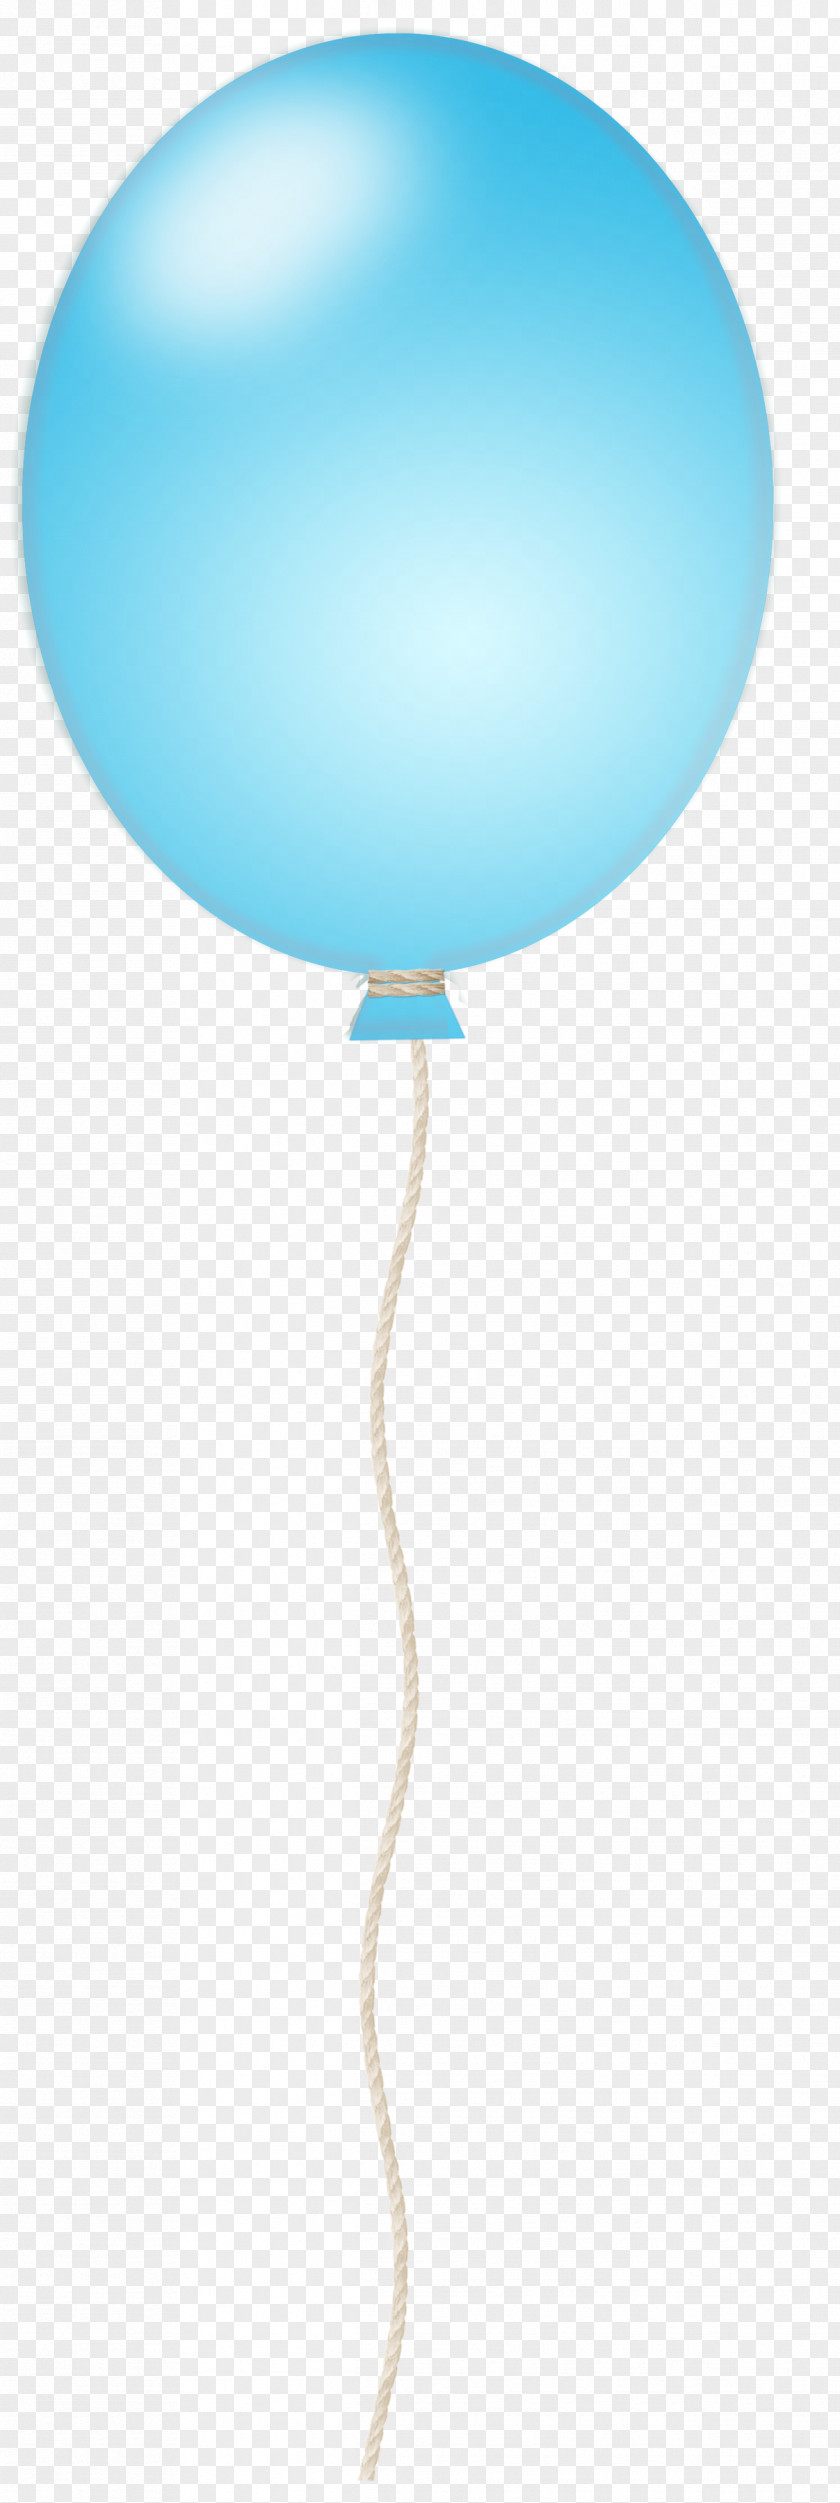 Text Balloon Turquoise Teal PNG